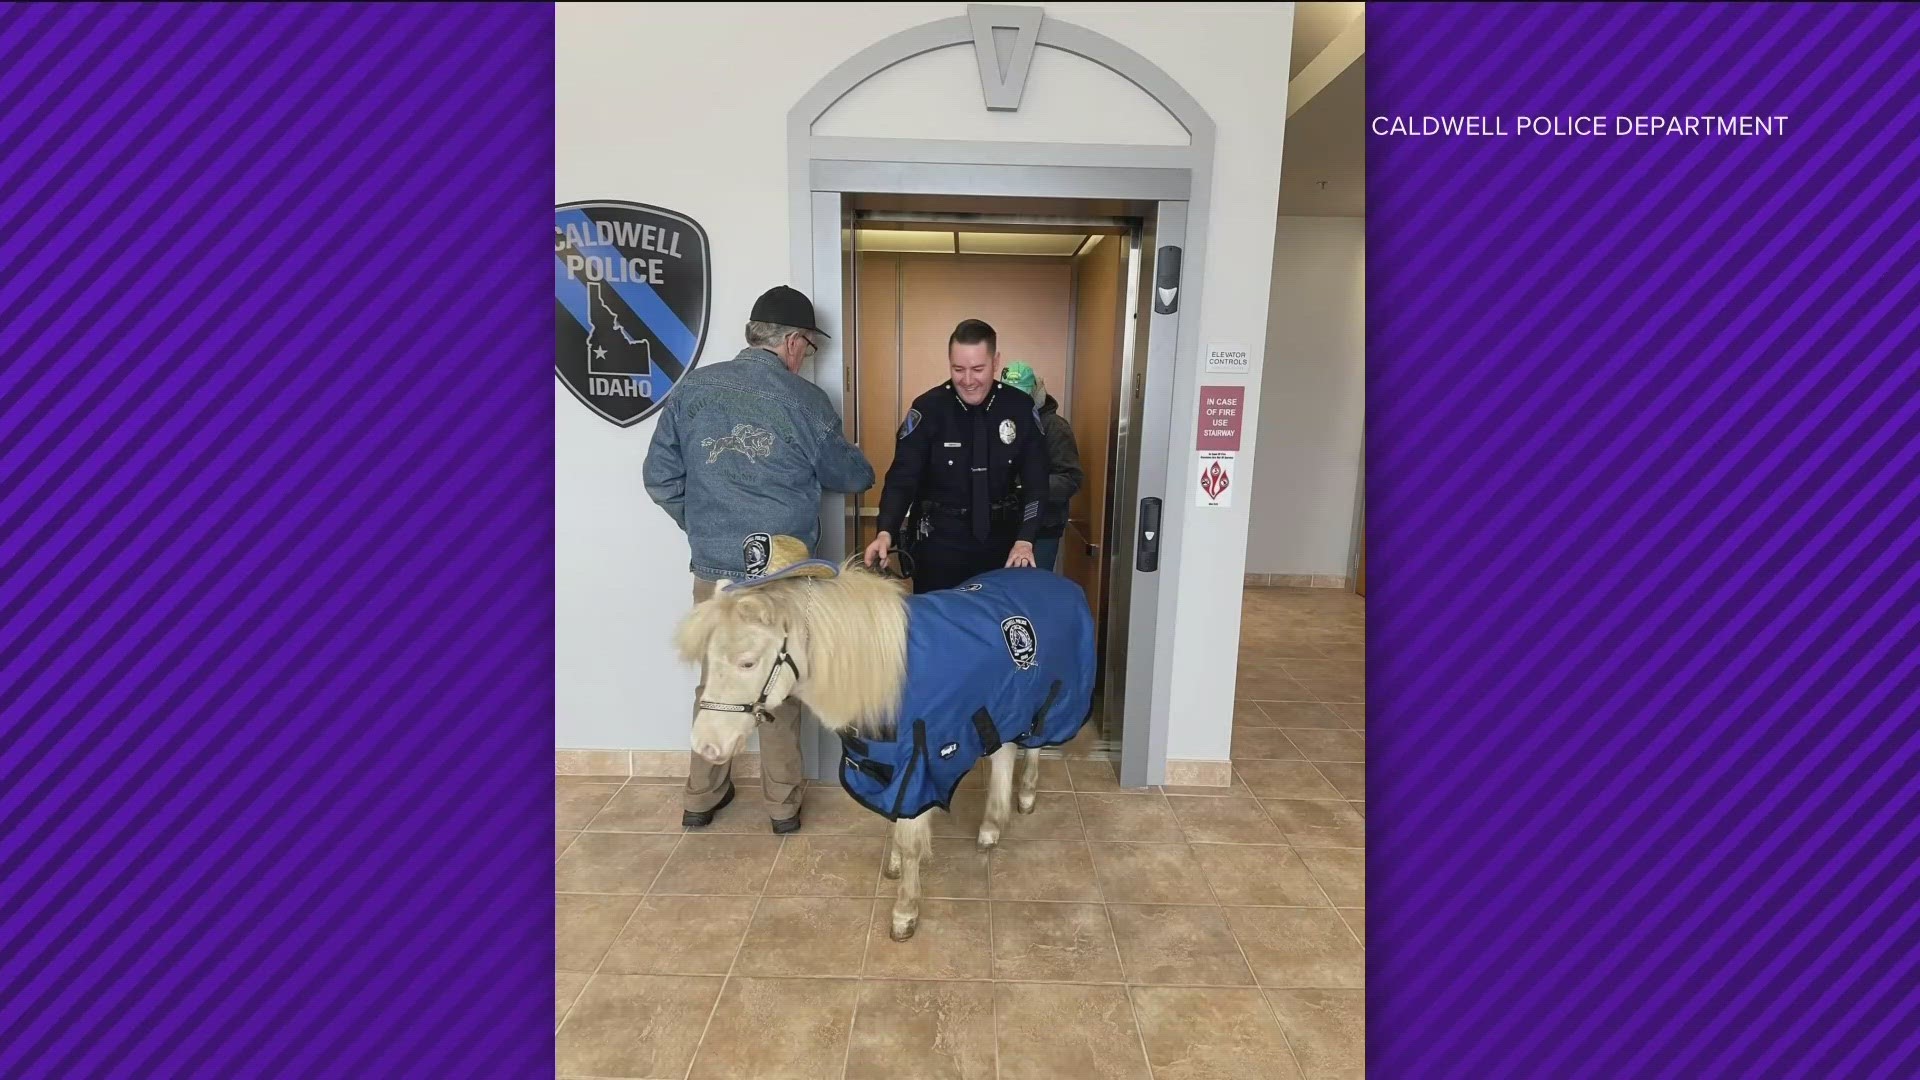 Complete with cowboy hat, this miniature horse ignores the neigh-sayers and uses his magic to bring smiles to the faces of the Caldwell community.